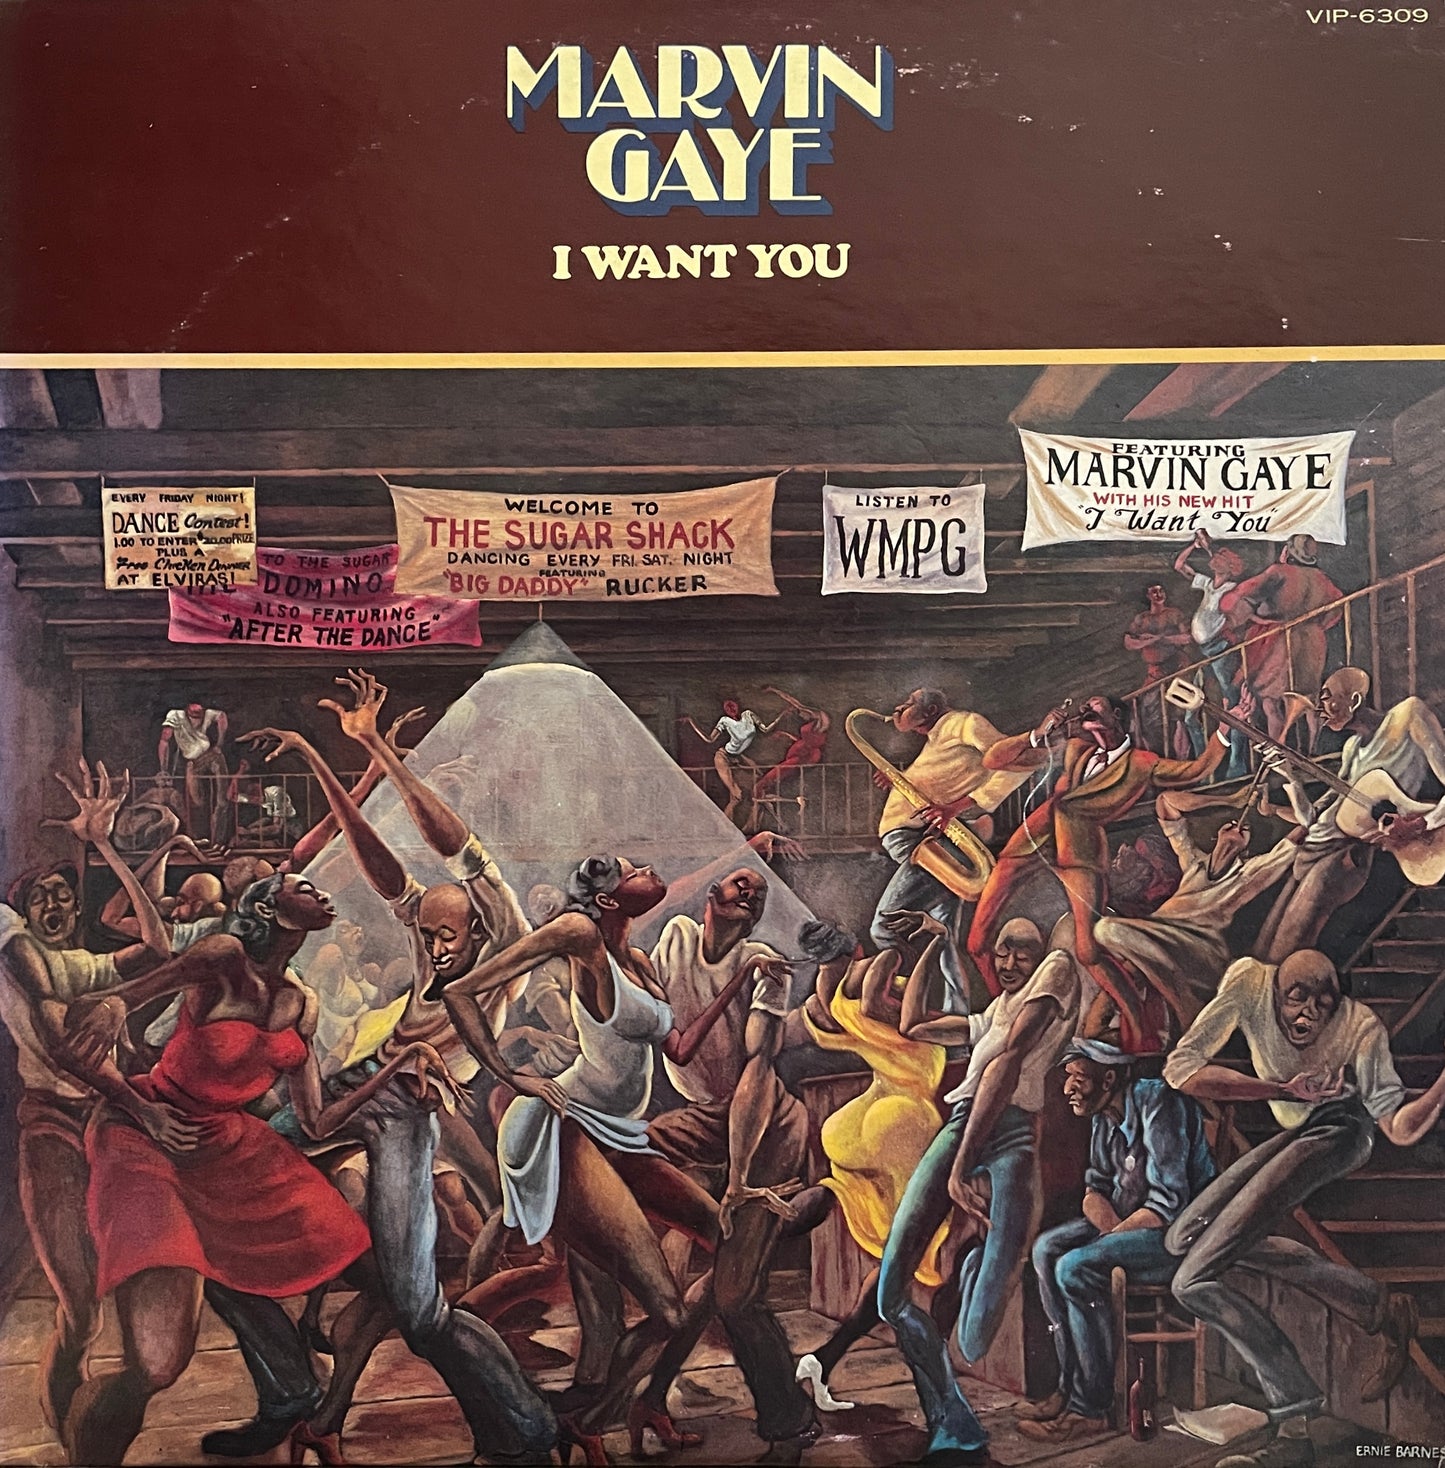 Marvin Gaye "I Want You" (1976)